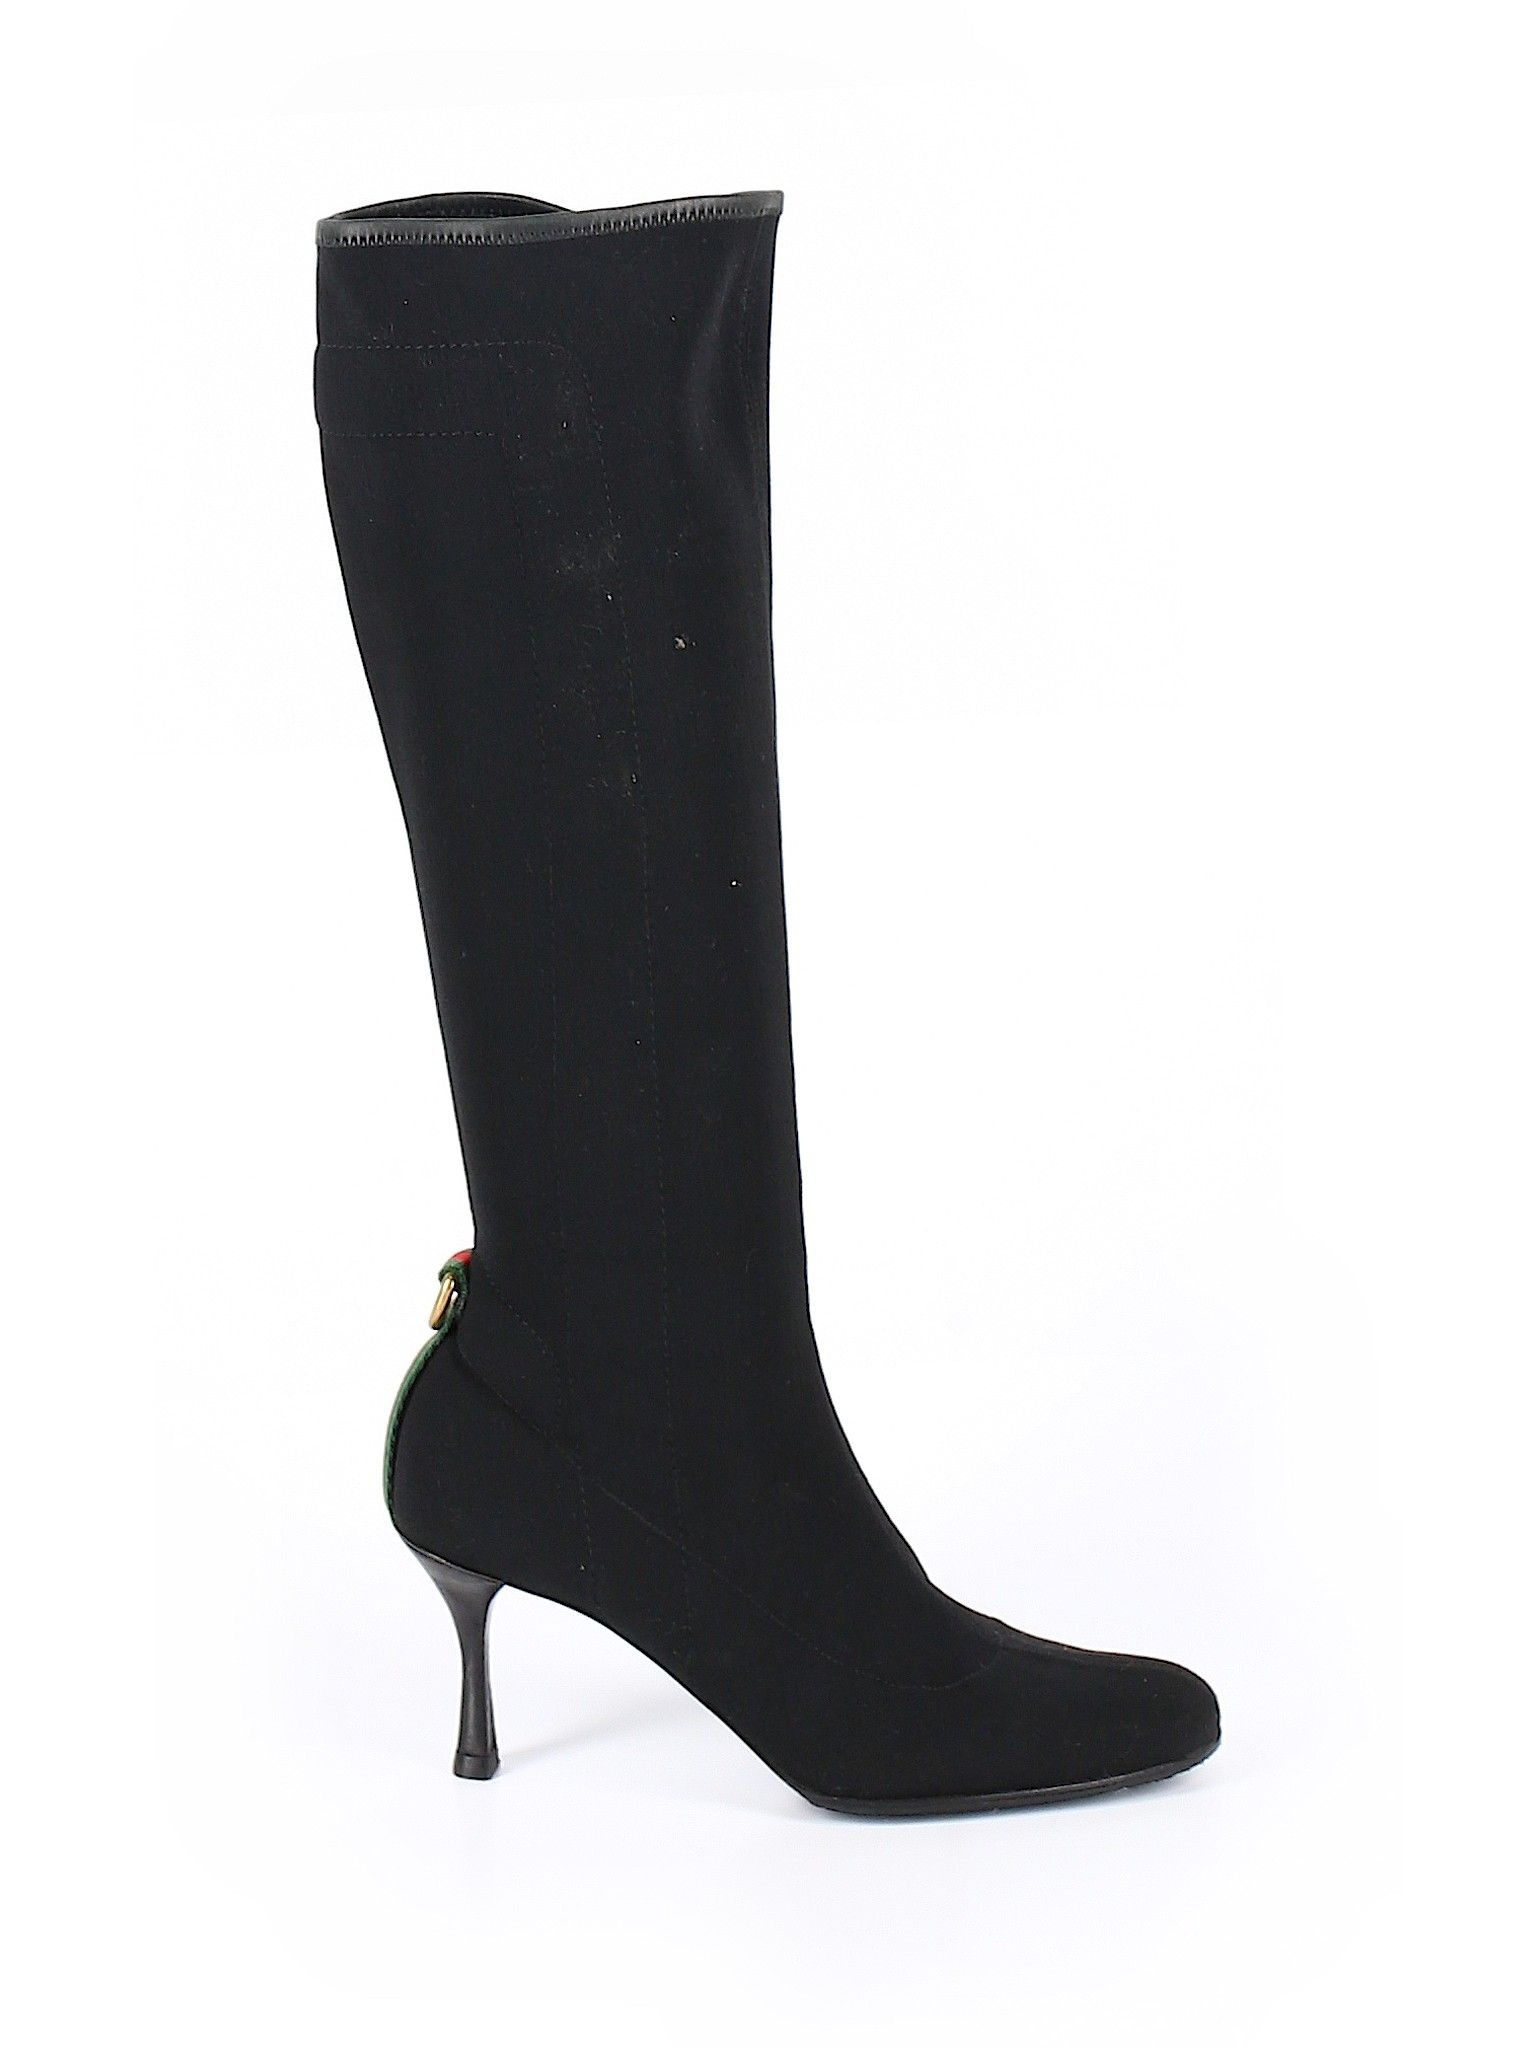 Gucci Boots Size 8: Black Women's Clothing - 52826947 | thredUP